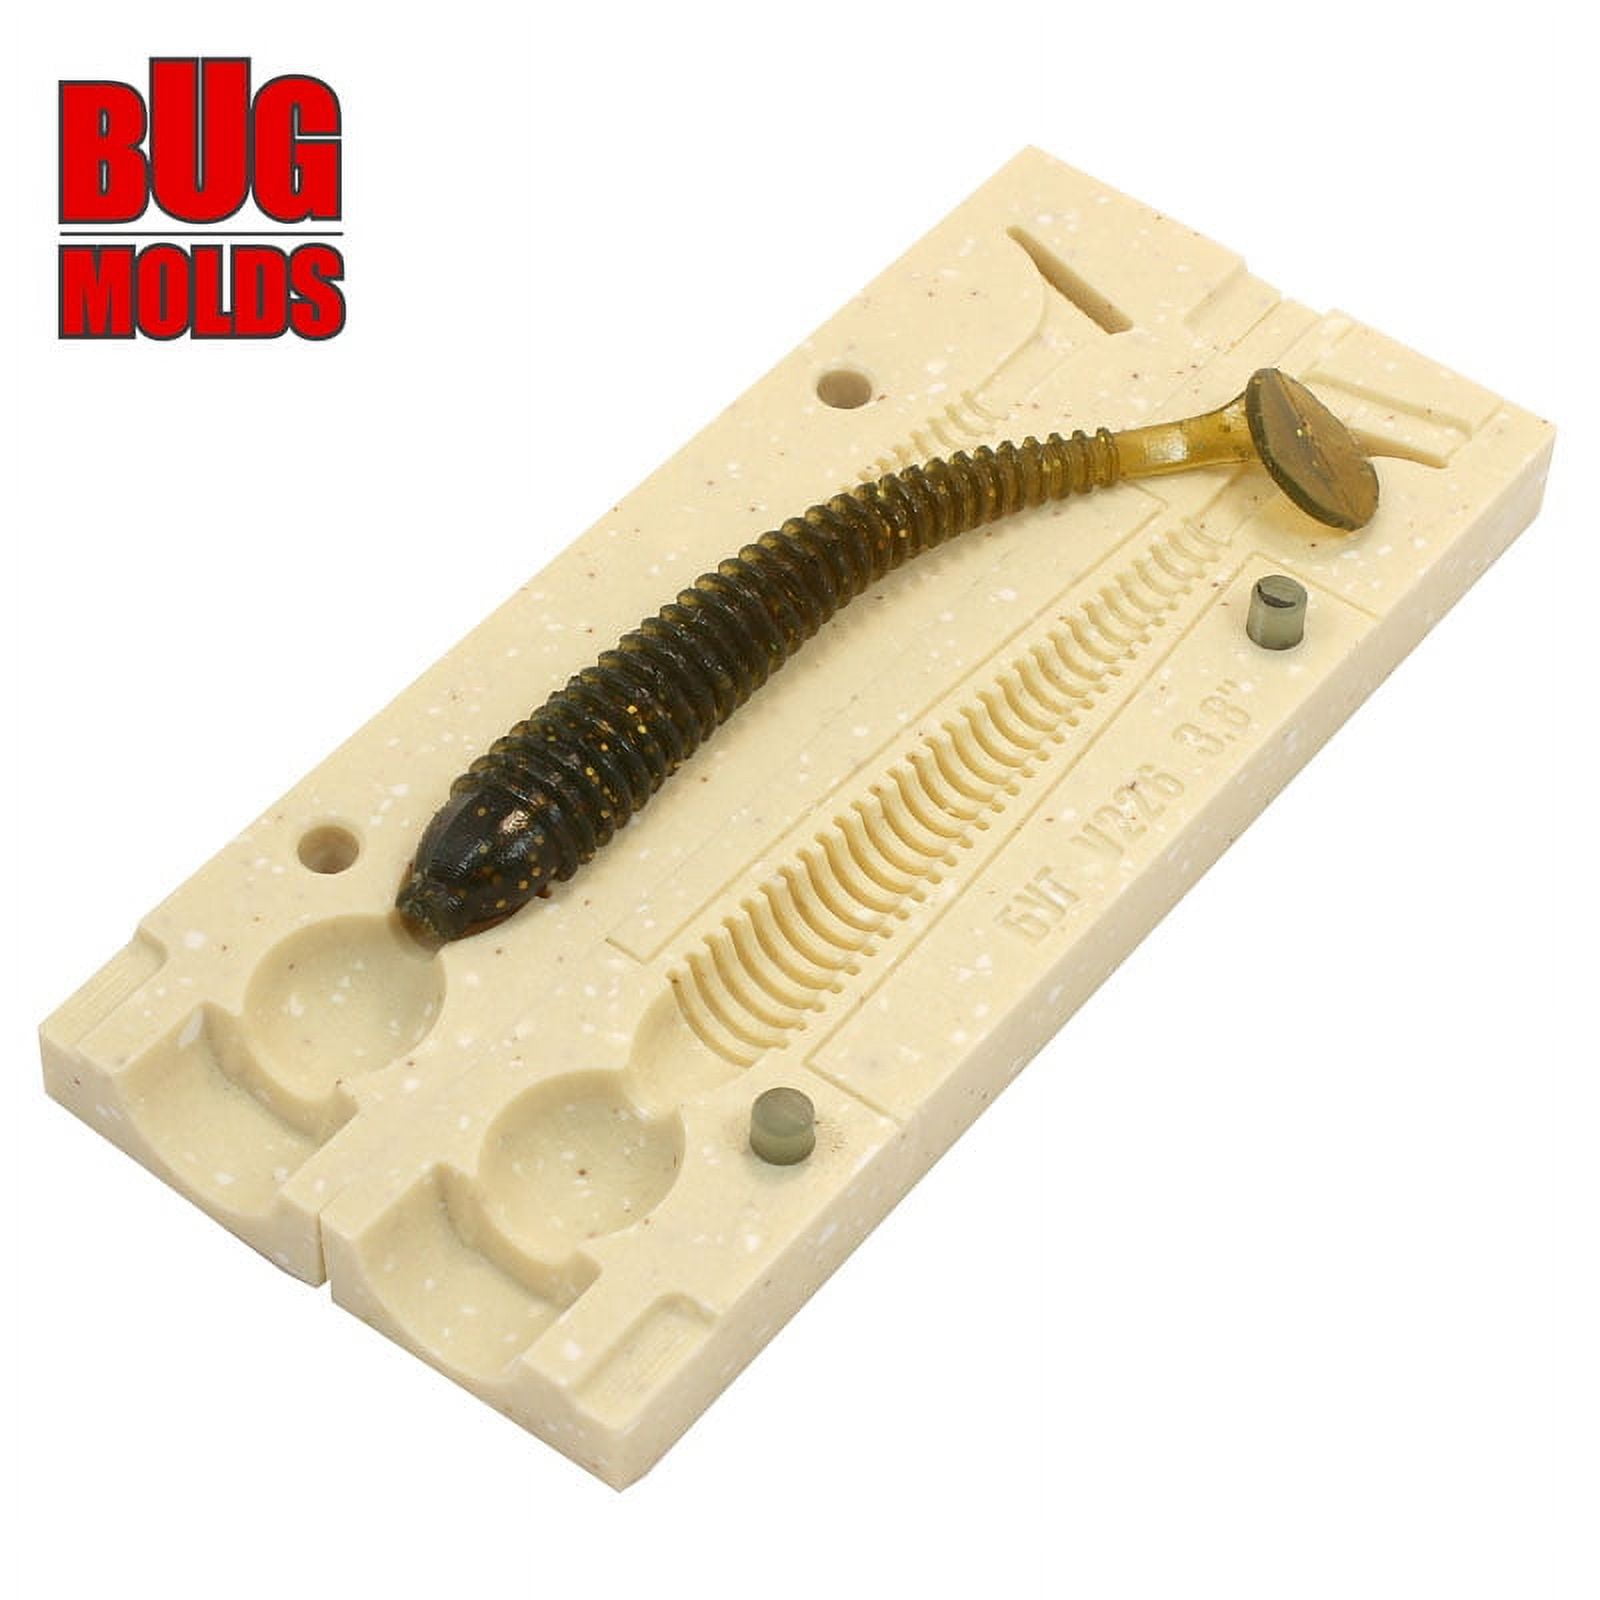 Artificial Stone Fishing Injection Molds, Durable Soft Fishing Lures